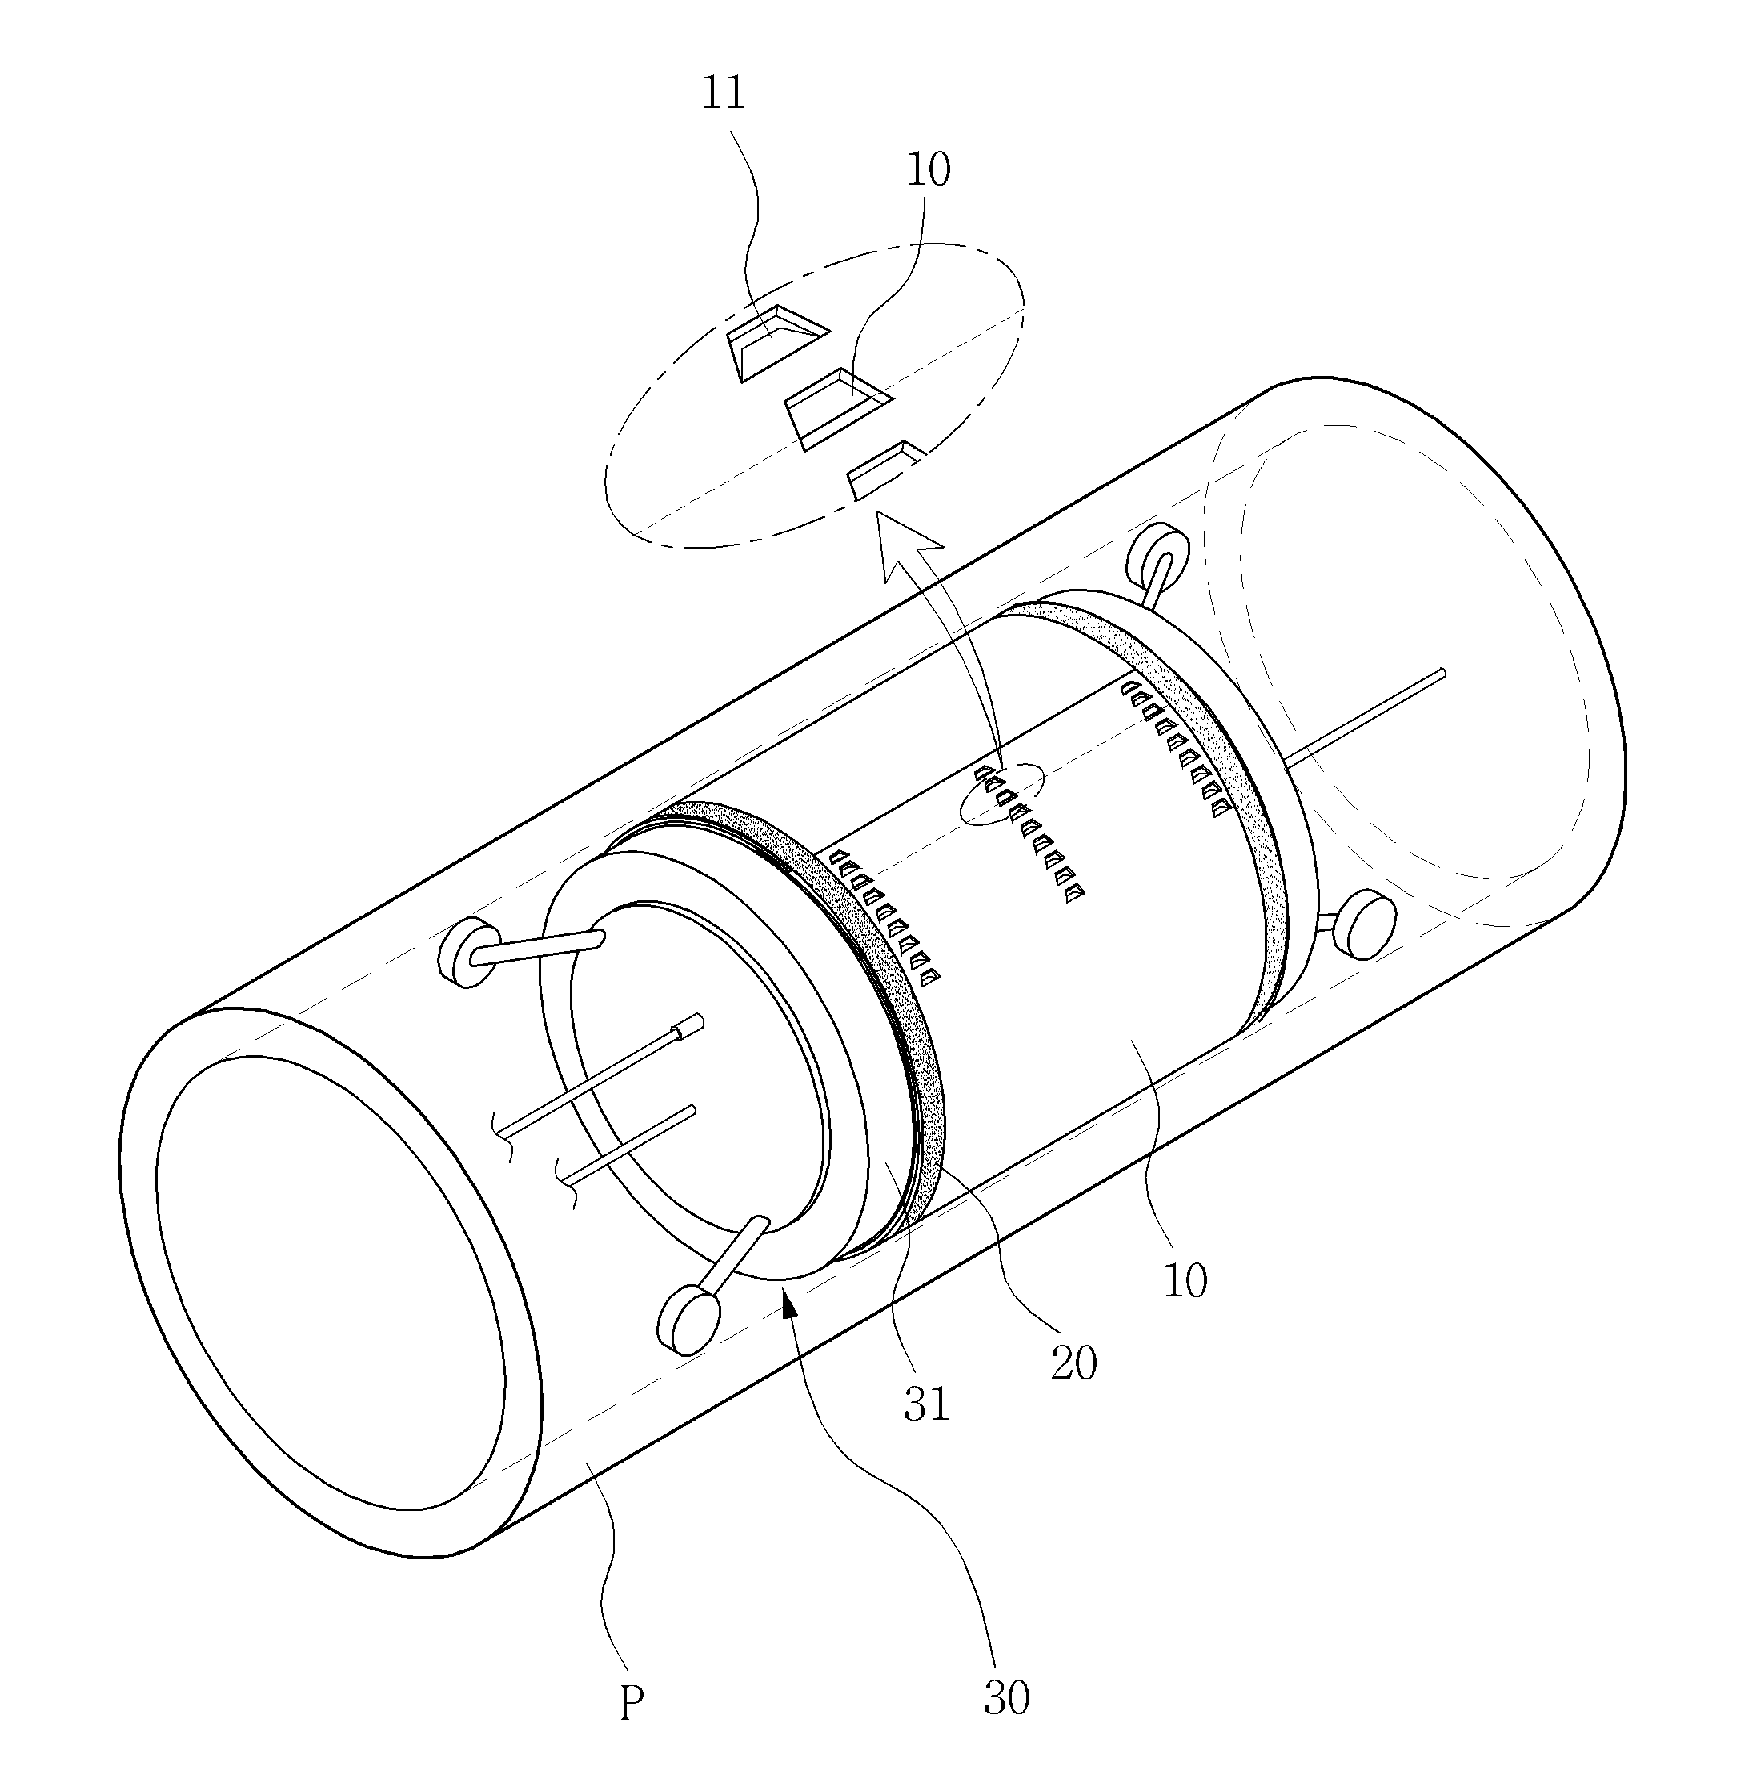 Reinforcing Materials For Repairing Underground Water Pipeline Without Excavation And Method For Repairing Thereof